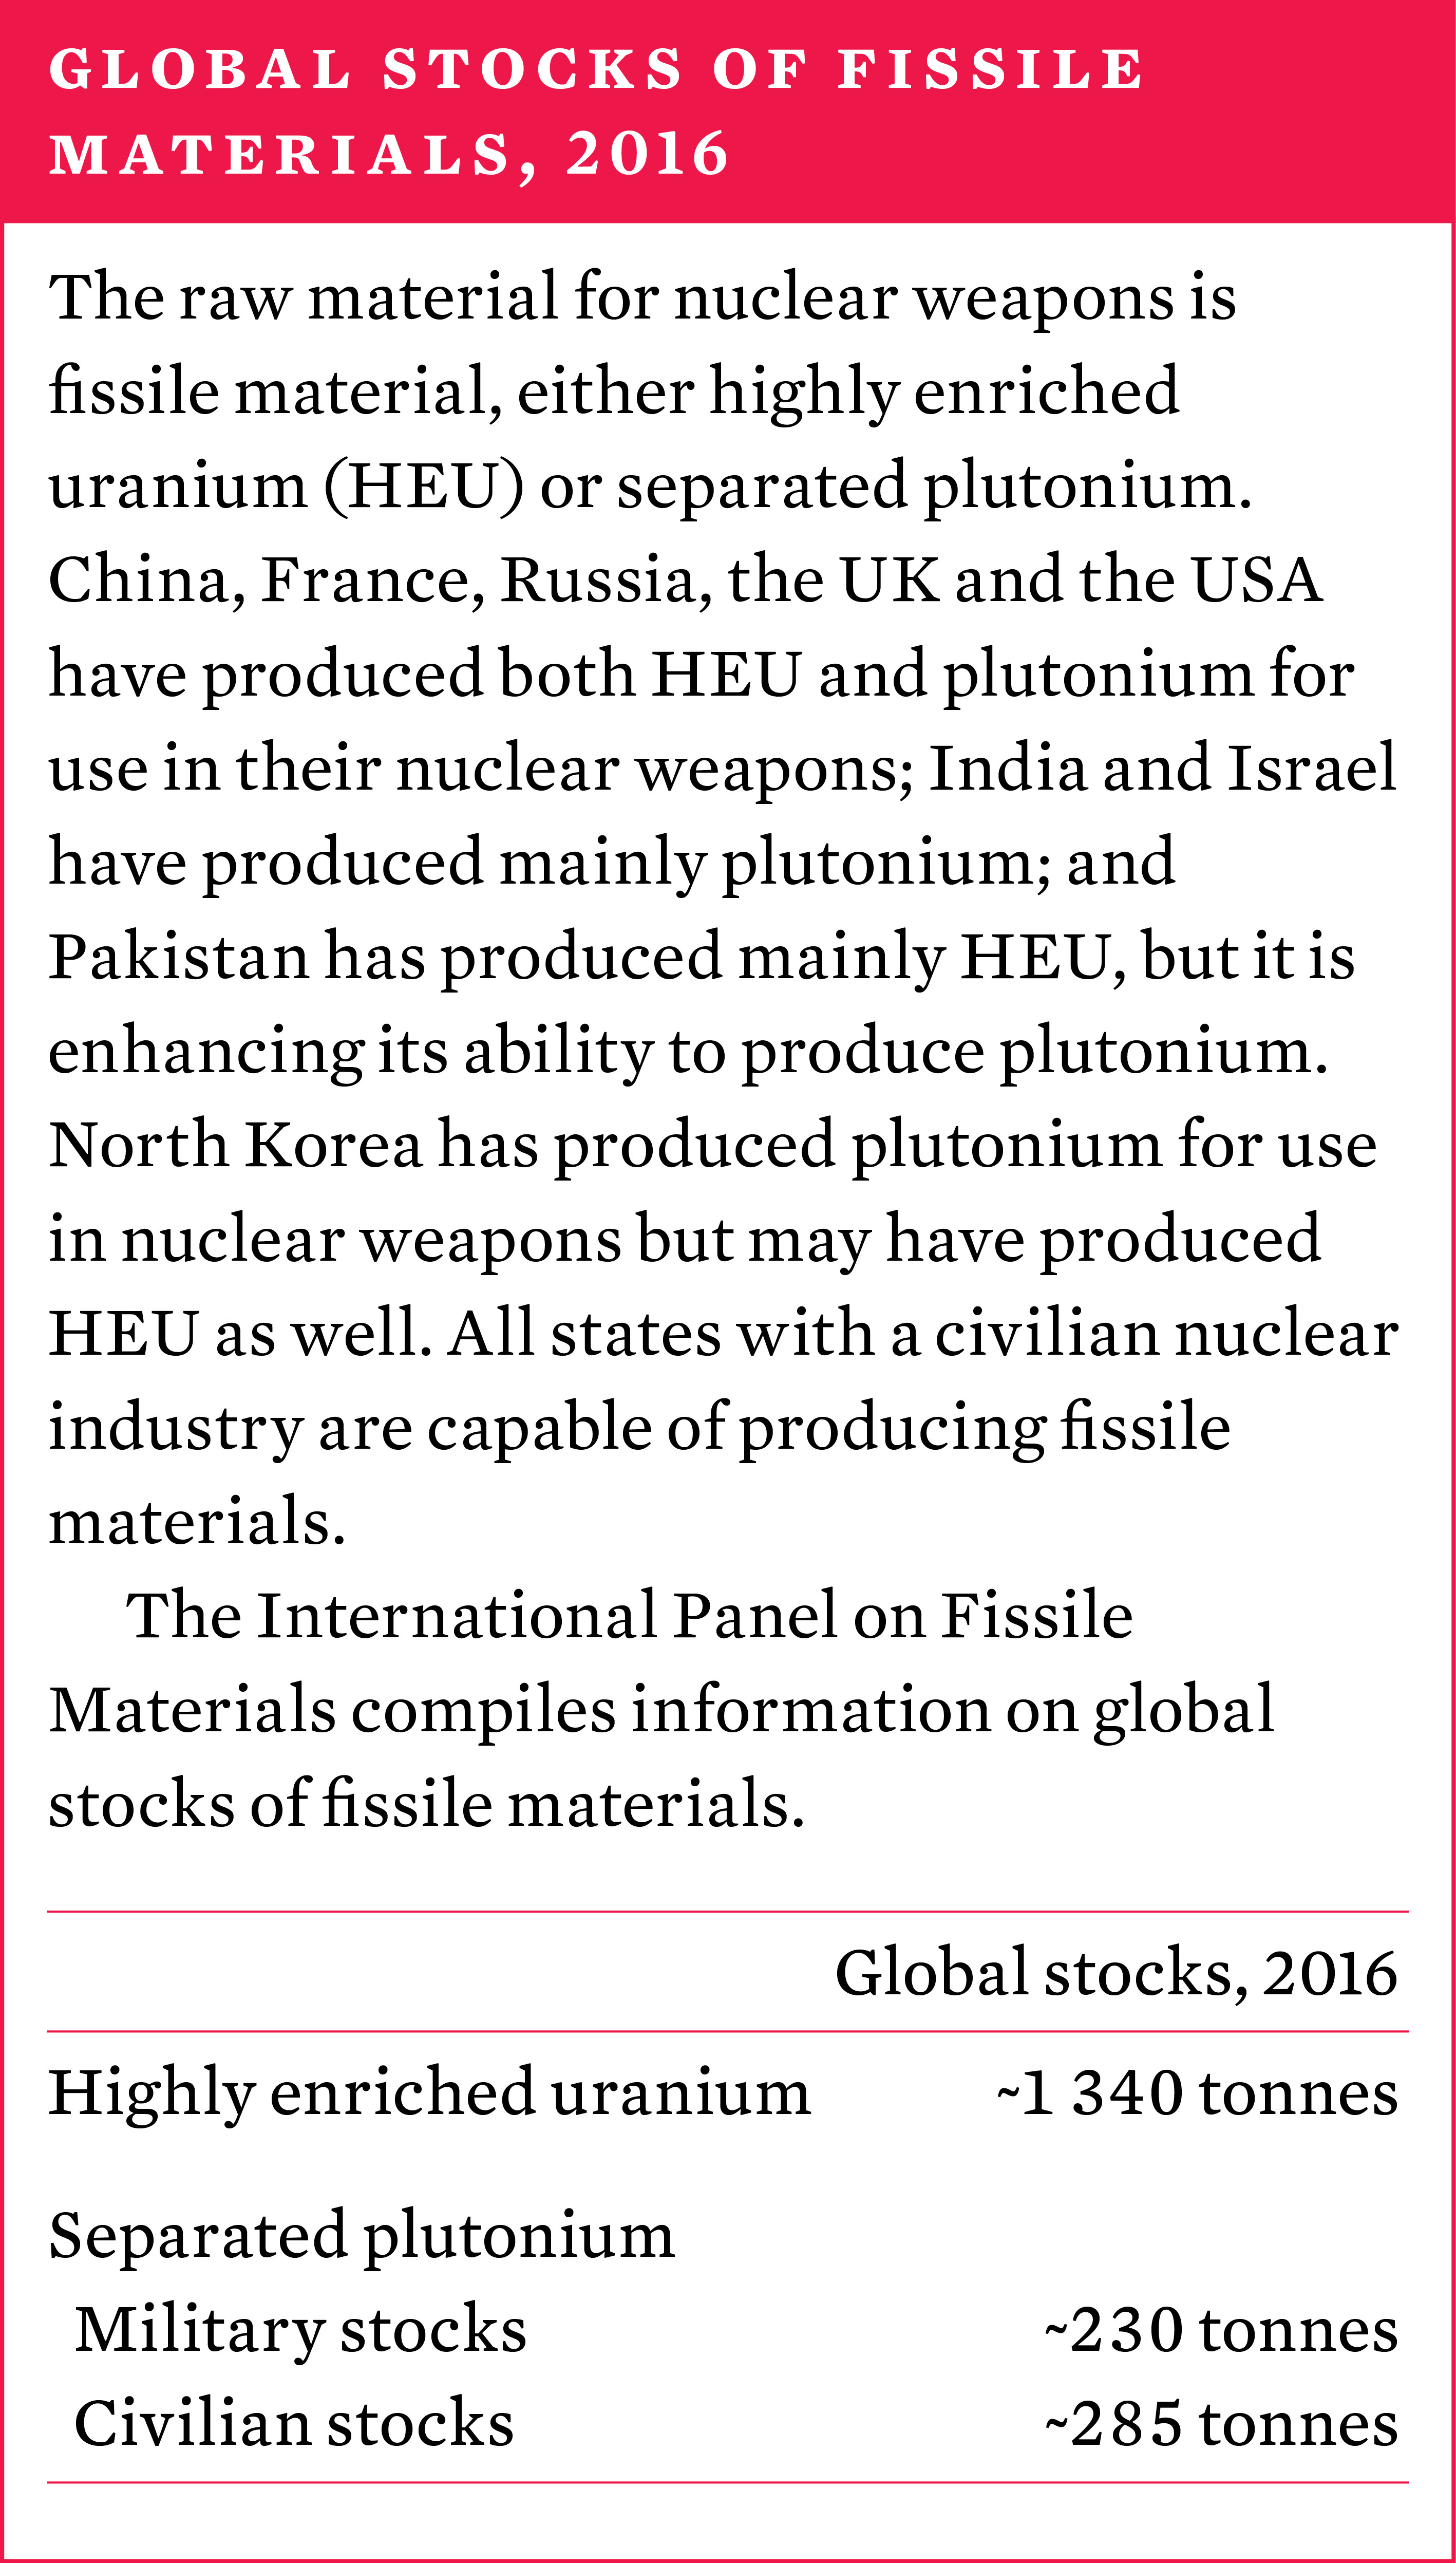 Global stocks of fissile materials, 2016